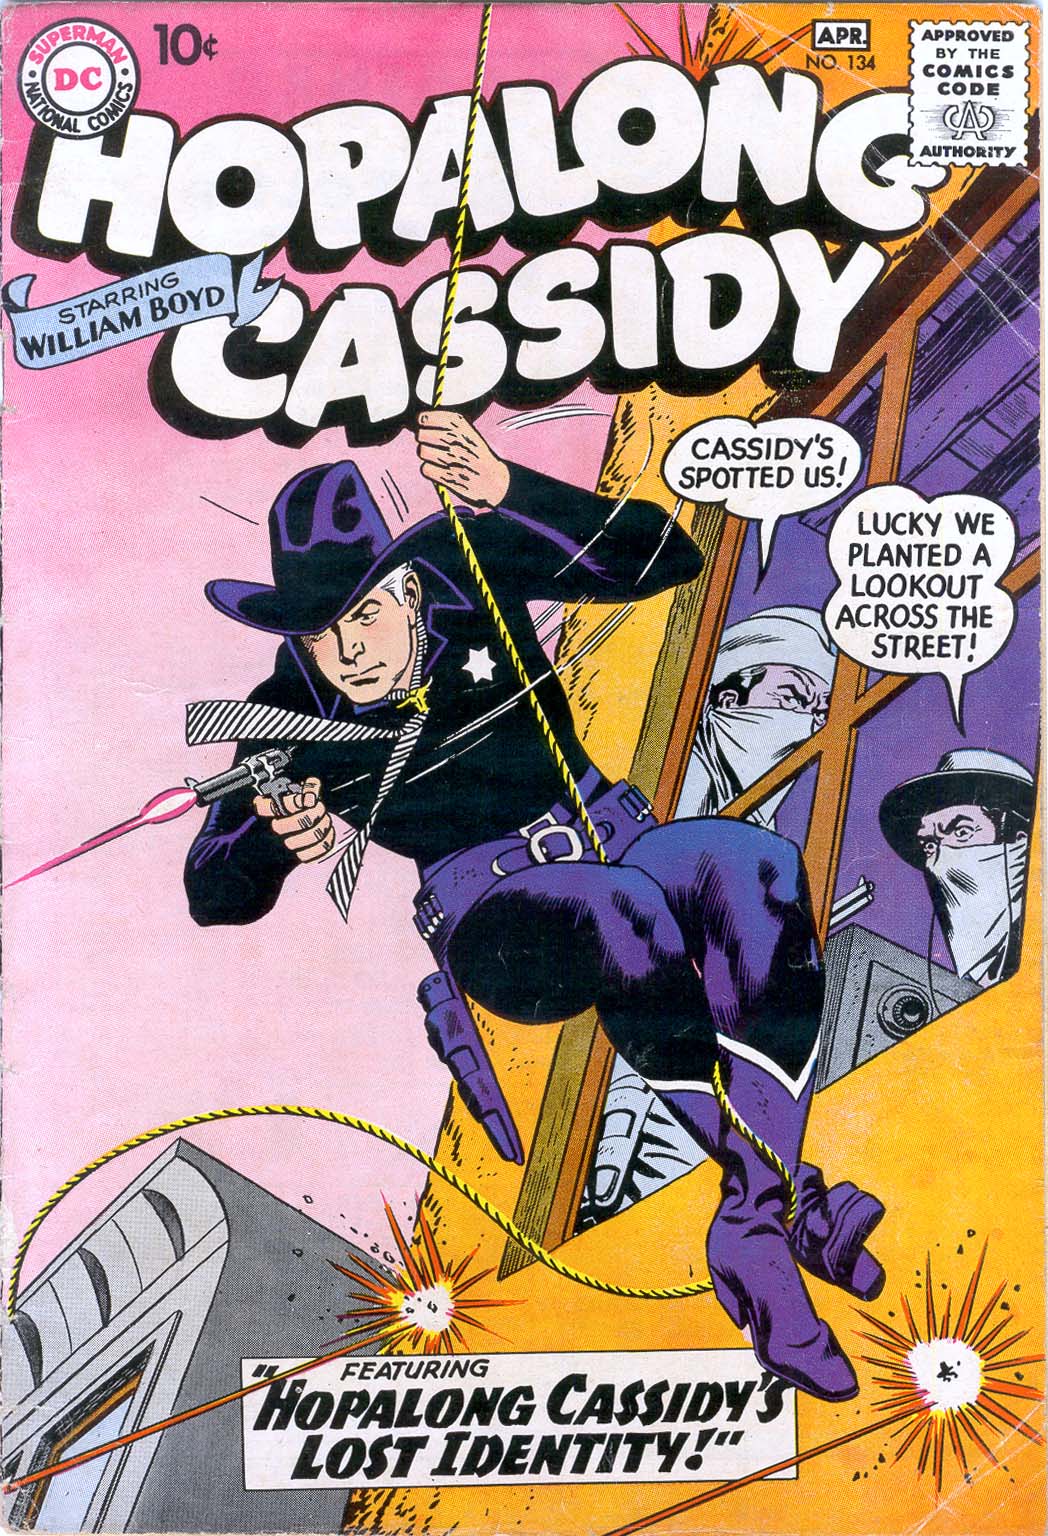 Read online Hopalong Cassidy comic -  Issue #134 - 1